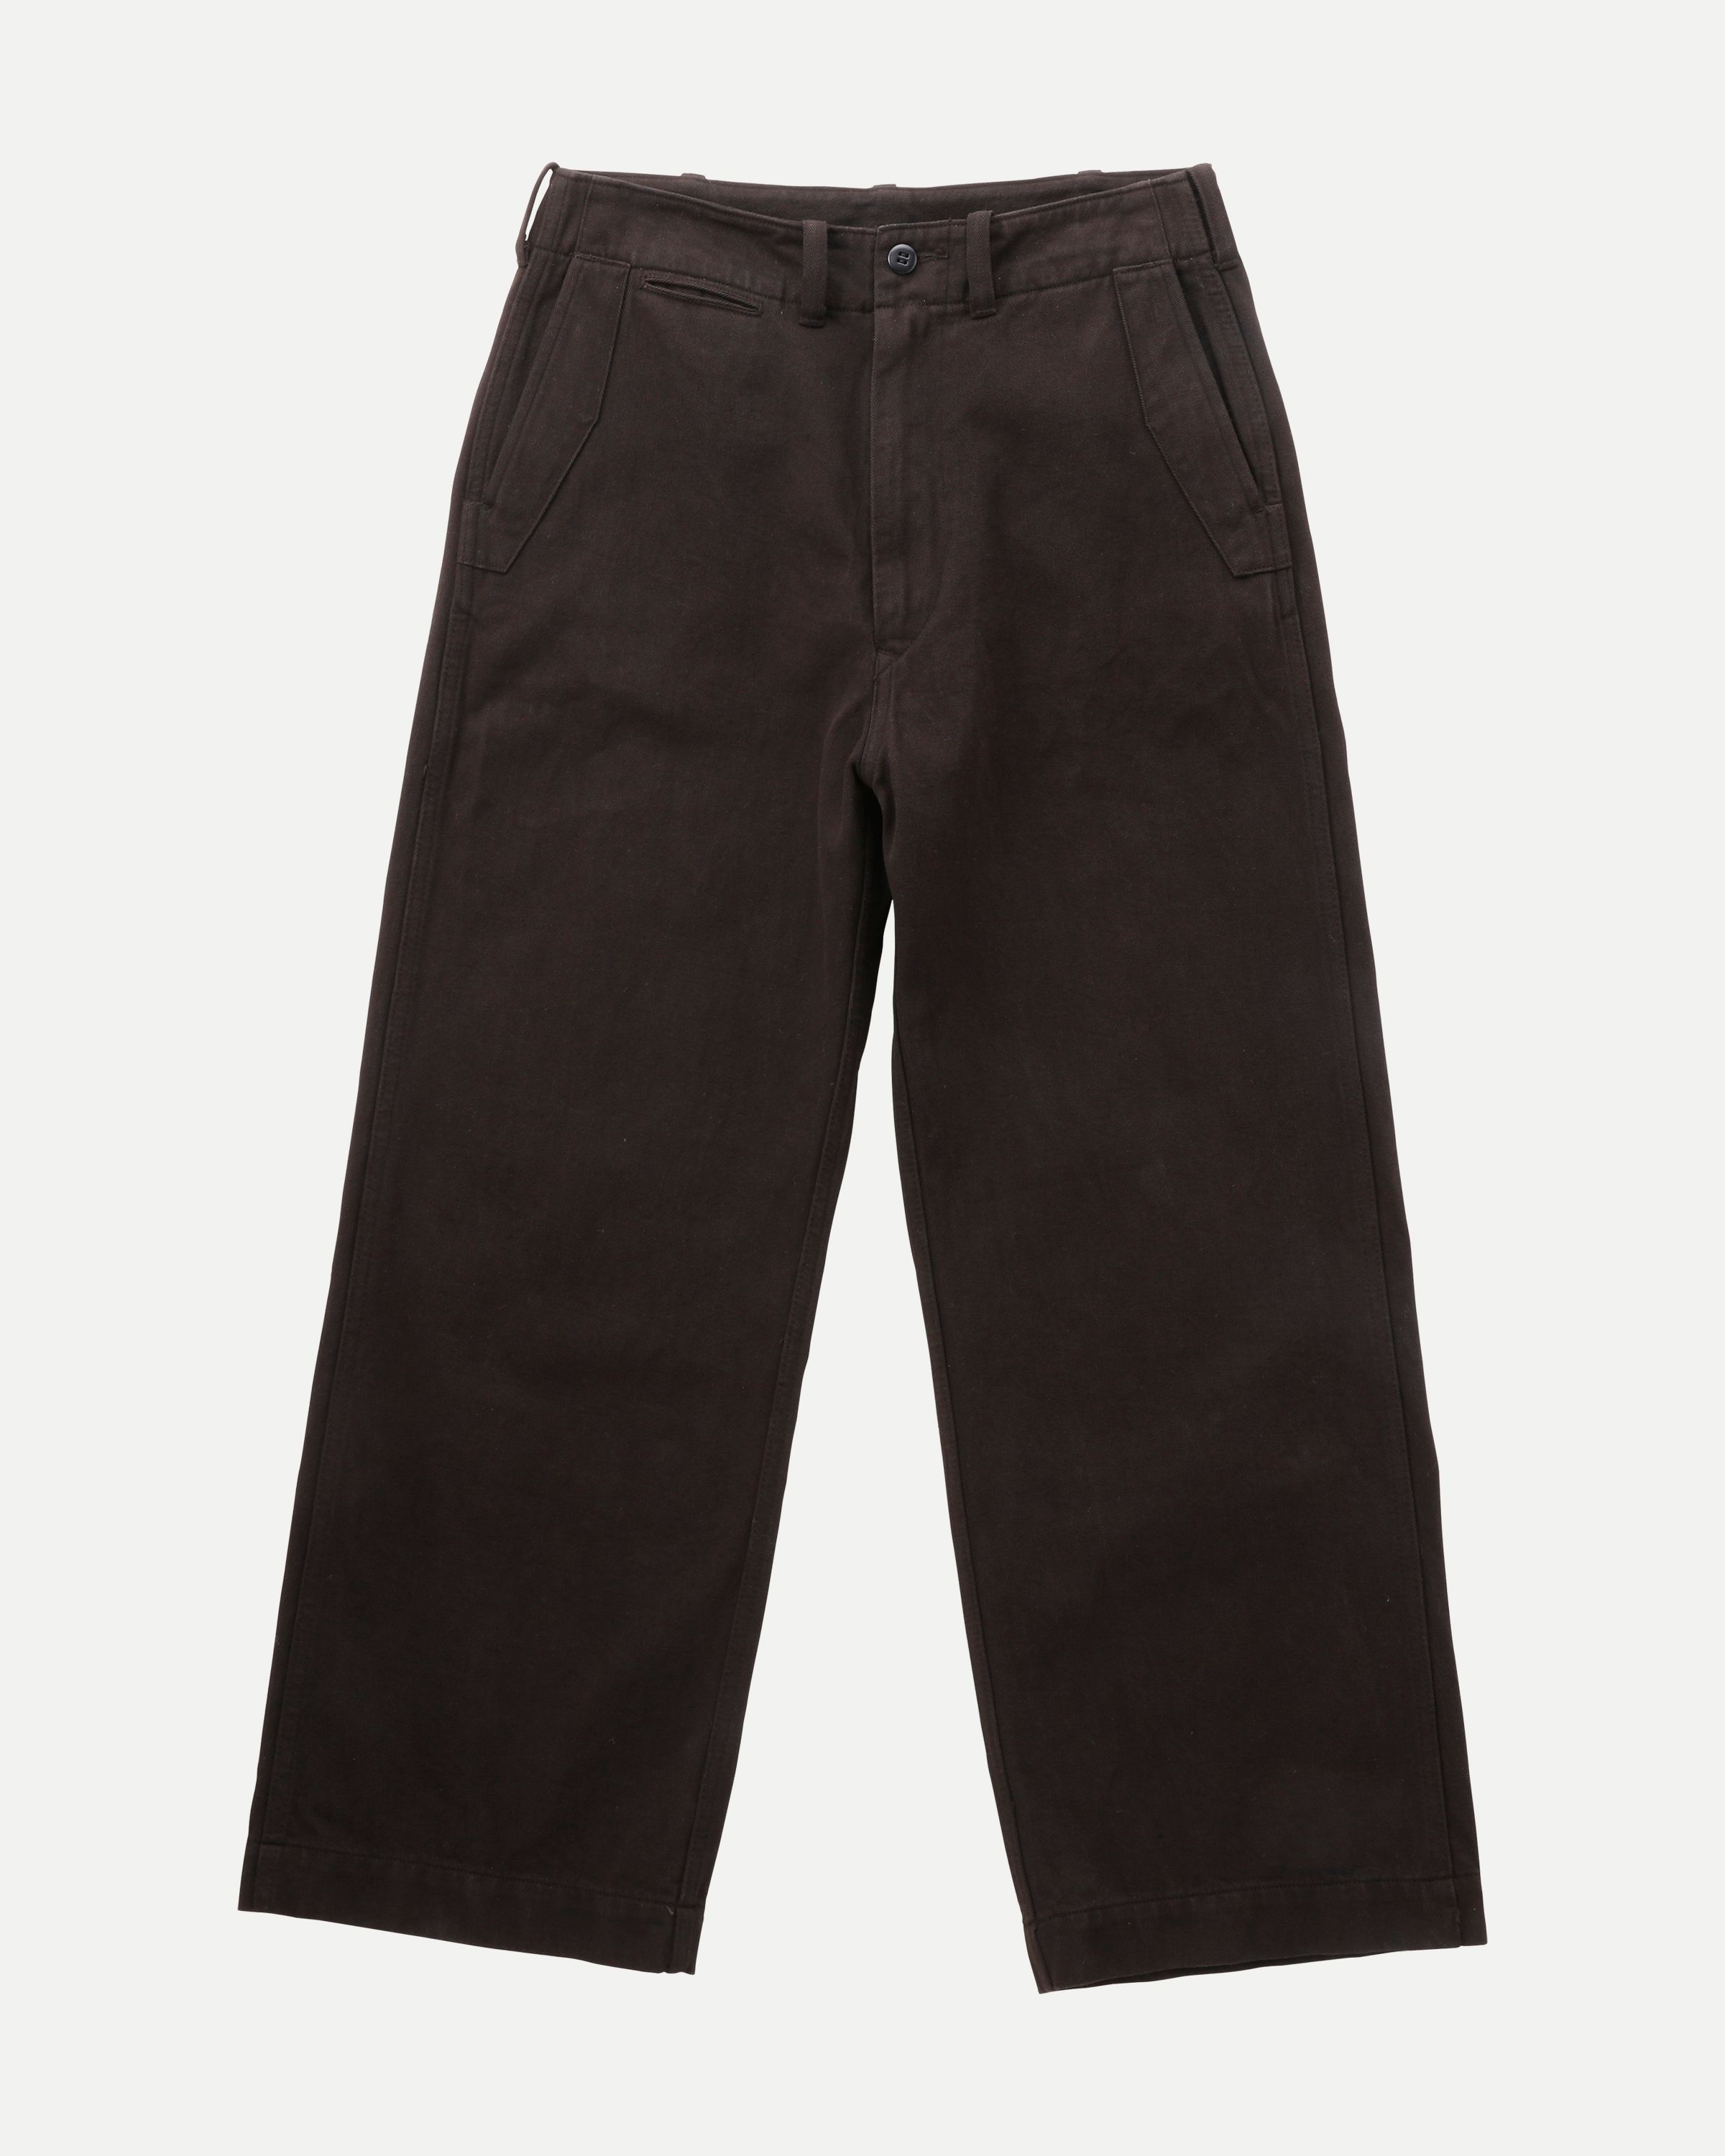 ENGINEER TROUSERS (LOT 202)